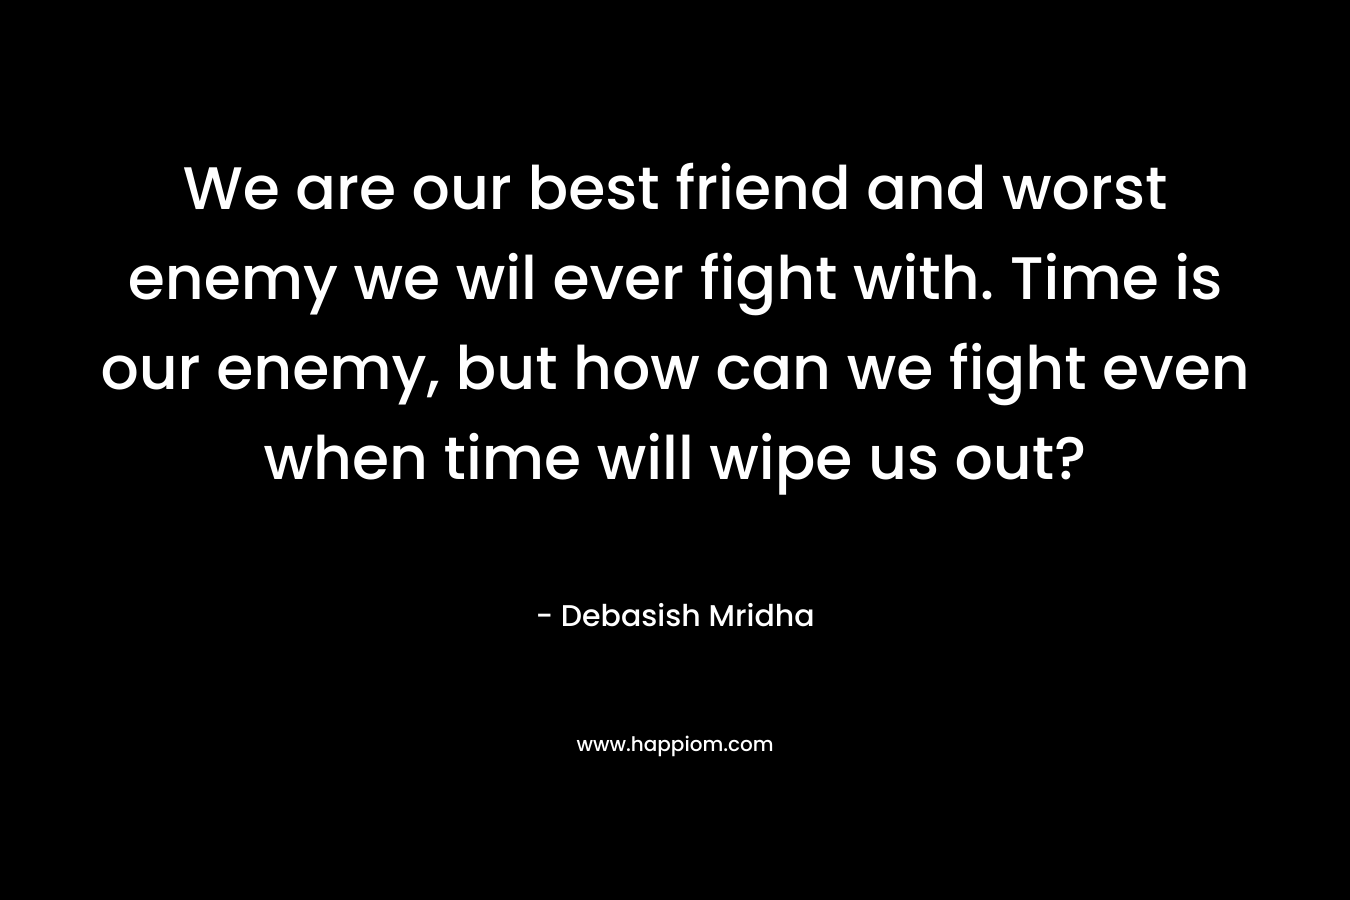 We are our best friend and worst enemy we wil ever fight with. Time is our enemy, but how can we fight even when time will wipe us out?